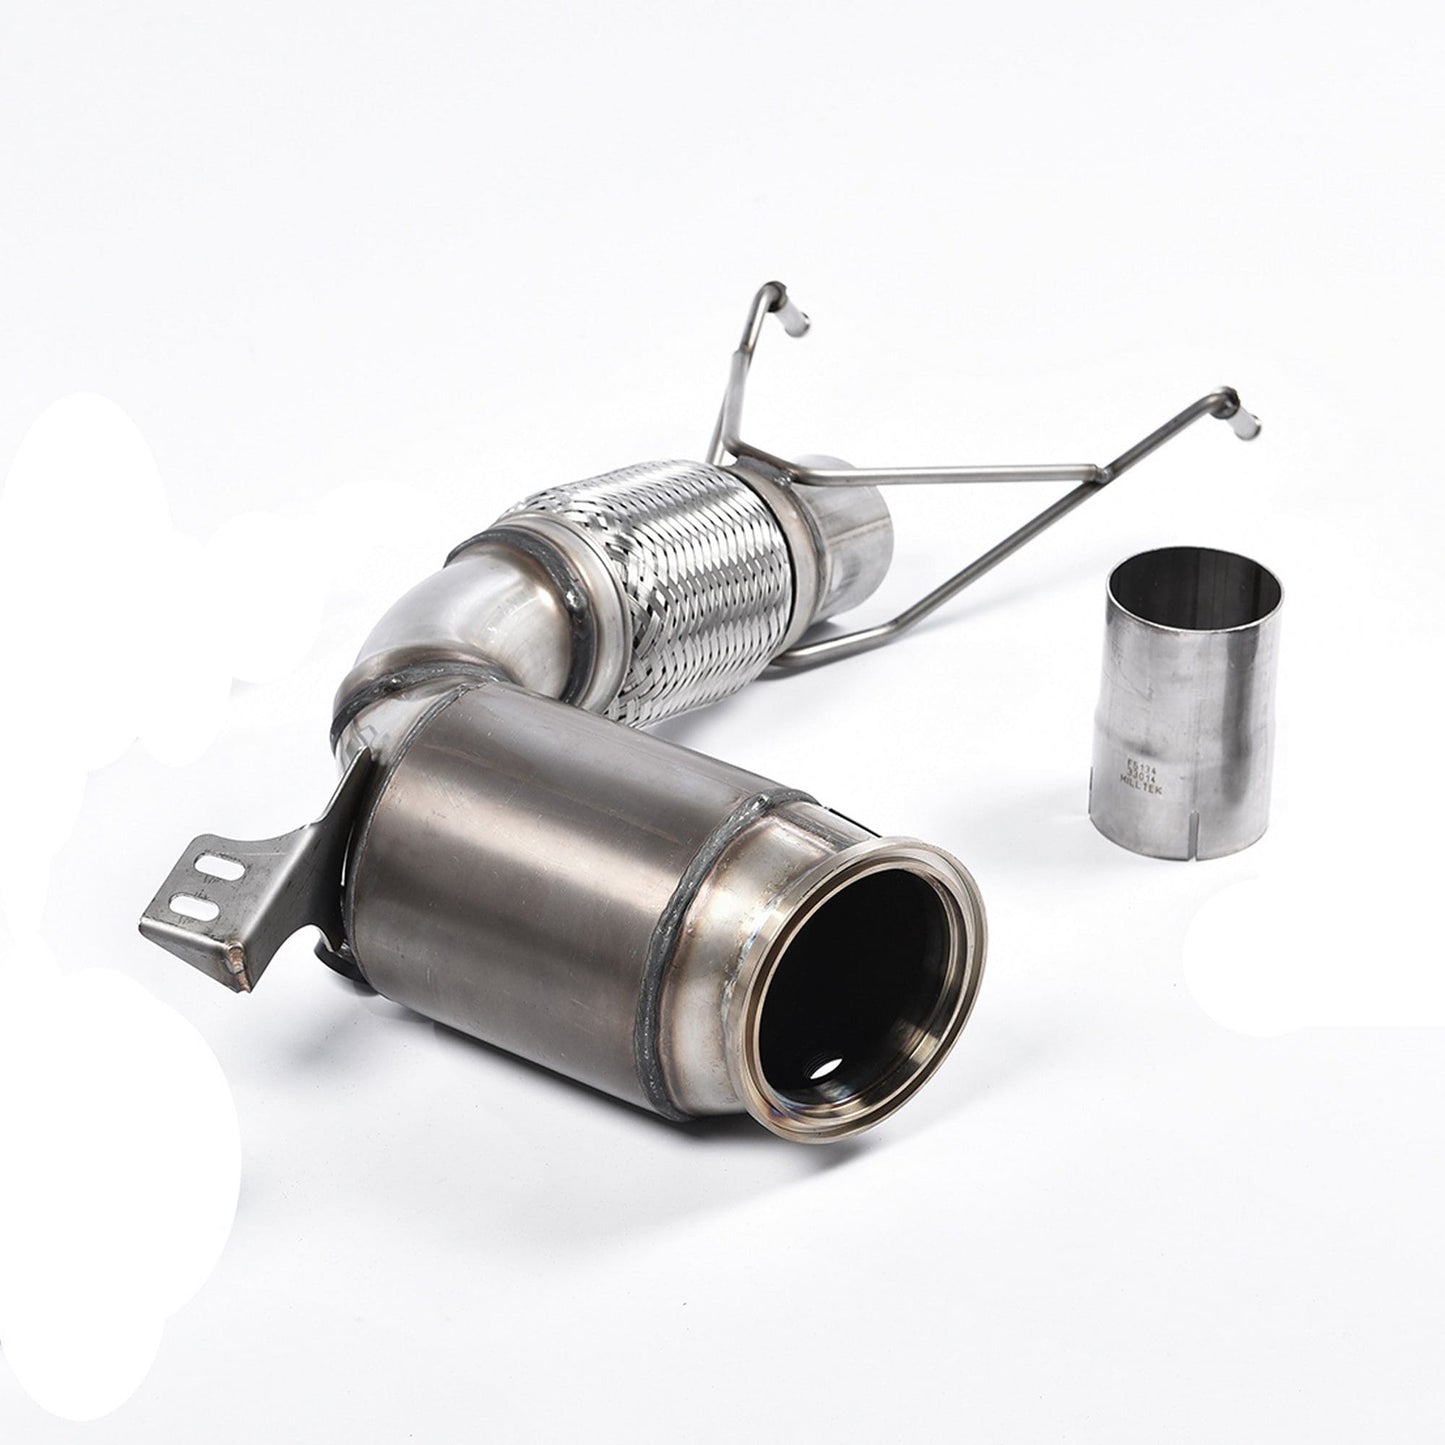 MANHART MH5MINI13104 DOWNPIPE SPORT FOR MINI F5X PRE-FACELIFT MCS / JCW WITH 200 CELLS CATALYTIC CONVERTER